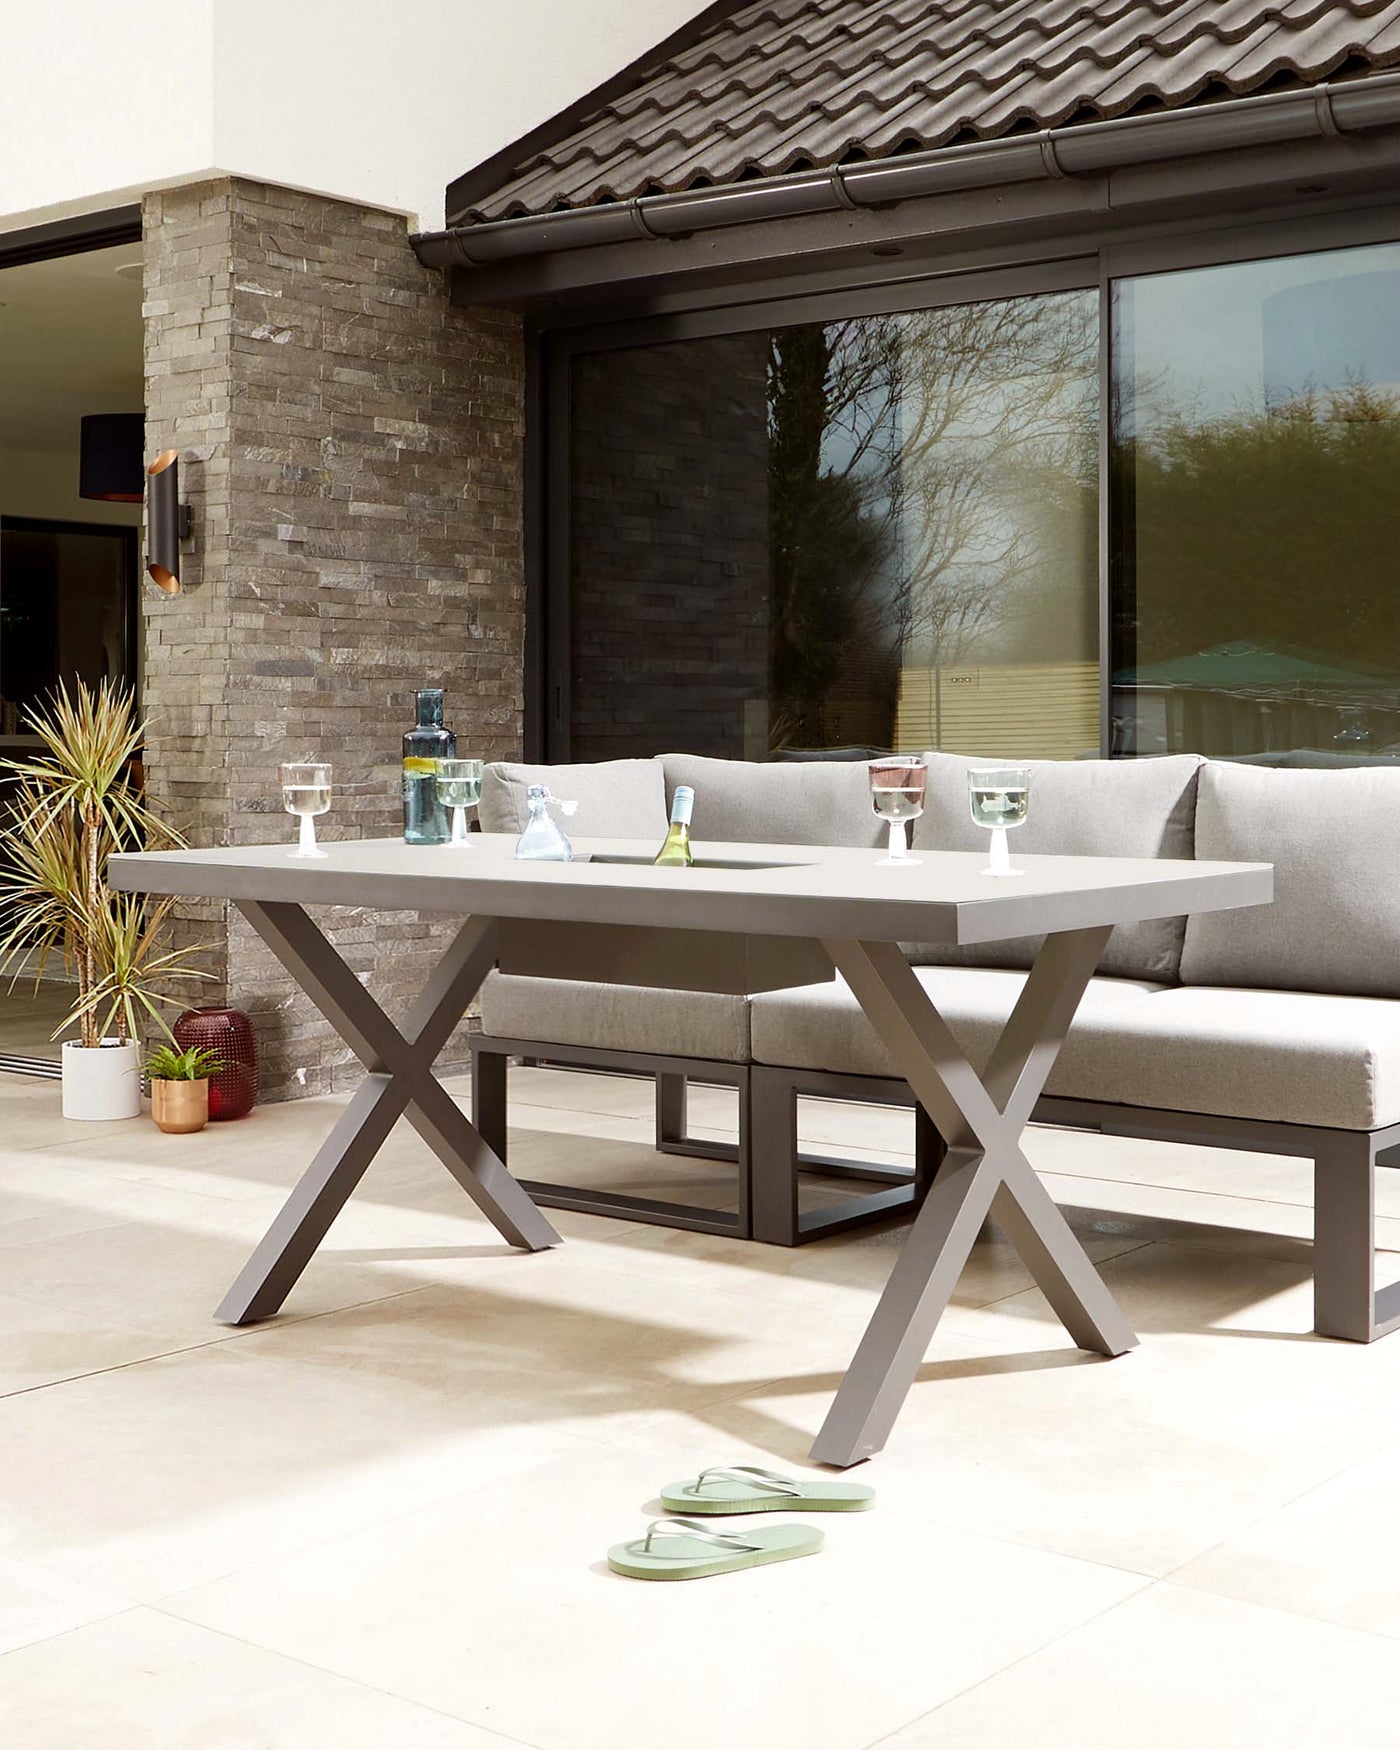 Contemporary outdoor furniture set featuring a grey rectangular dining table with a solid top and a distinctive X-shaped base, paired with a matching L-shaped sectional sofa with plush grey cushions, all arranged on a patio with a stone pillar and sliding glass doors in the background.